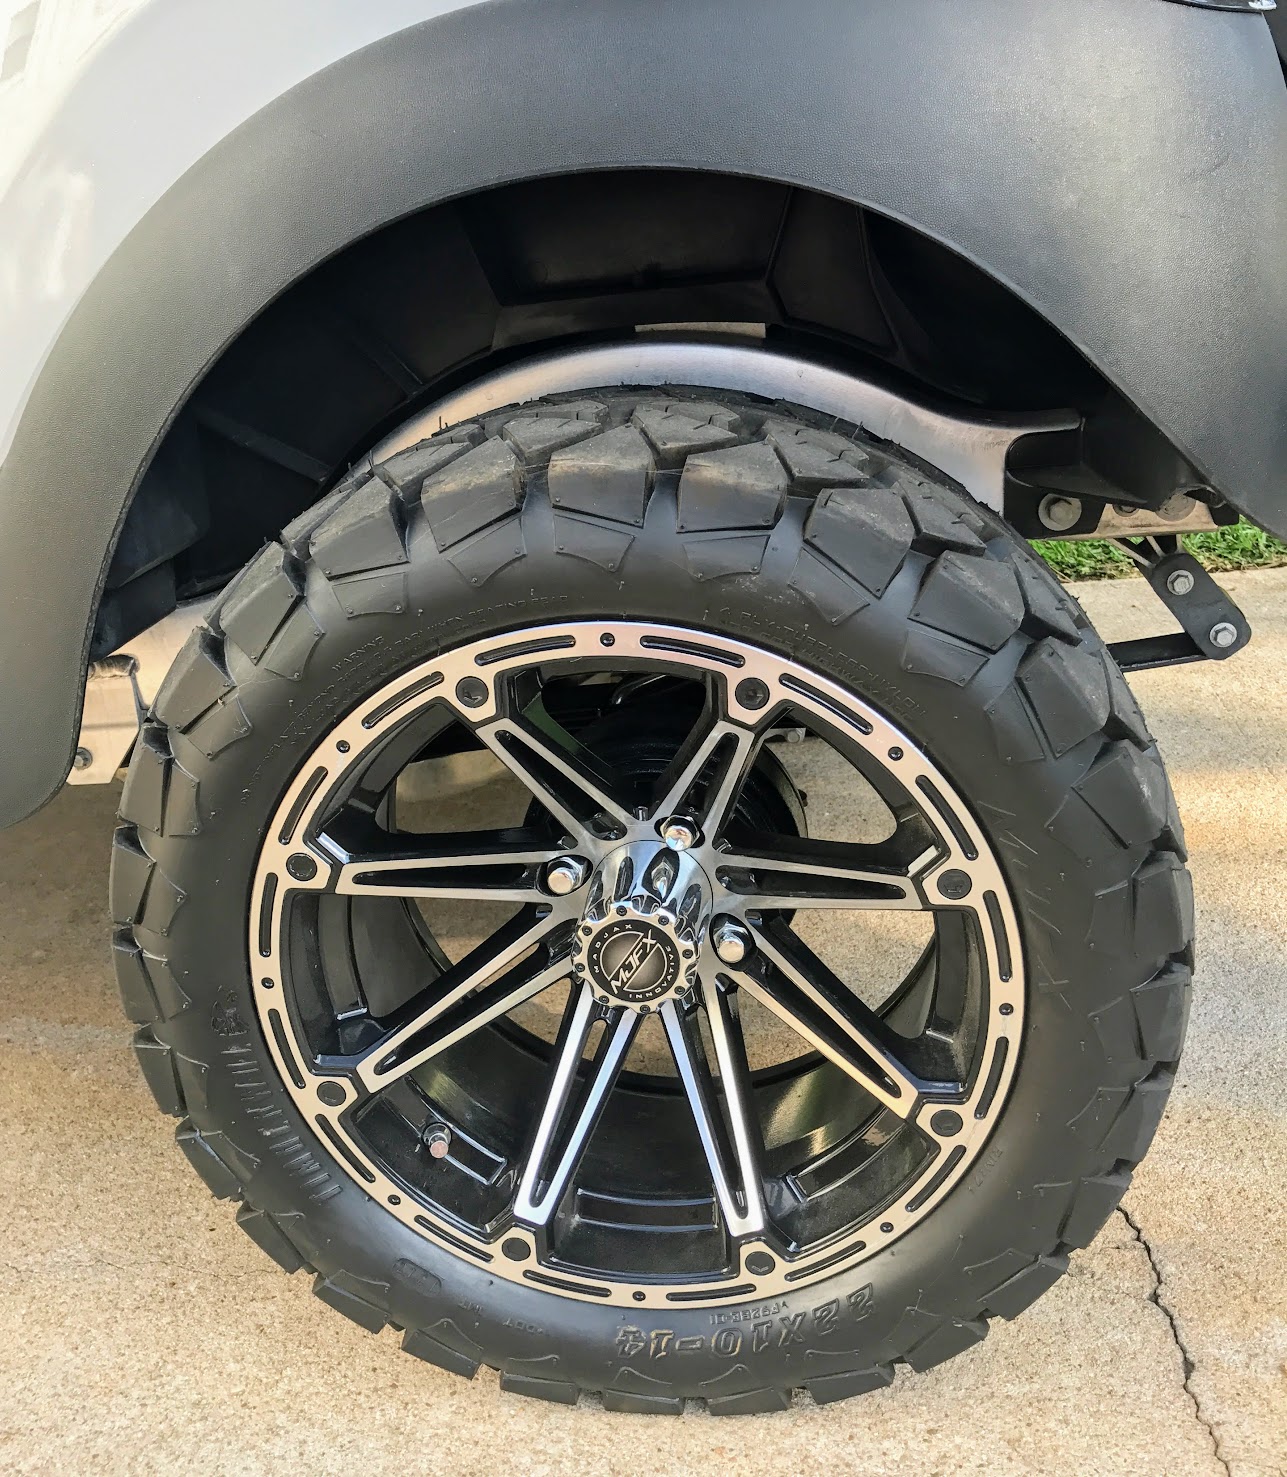 Custom Golf Cart Wheels Your Guide to Styles and Sizes